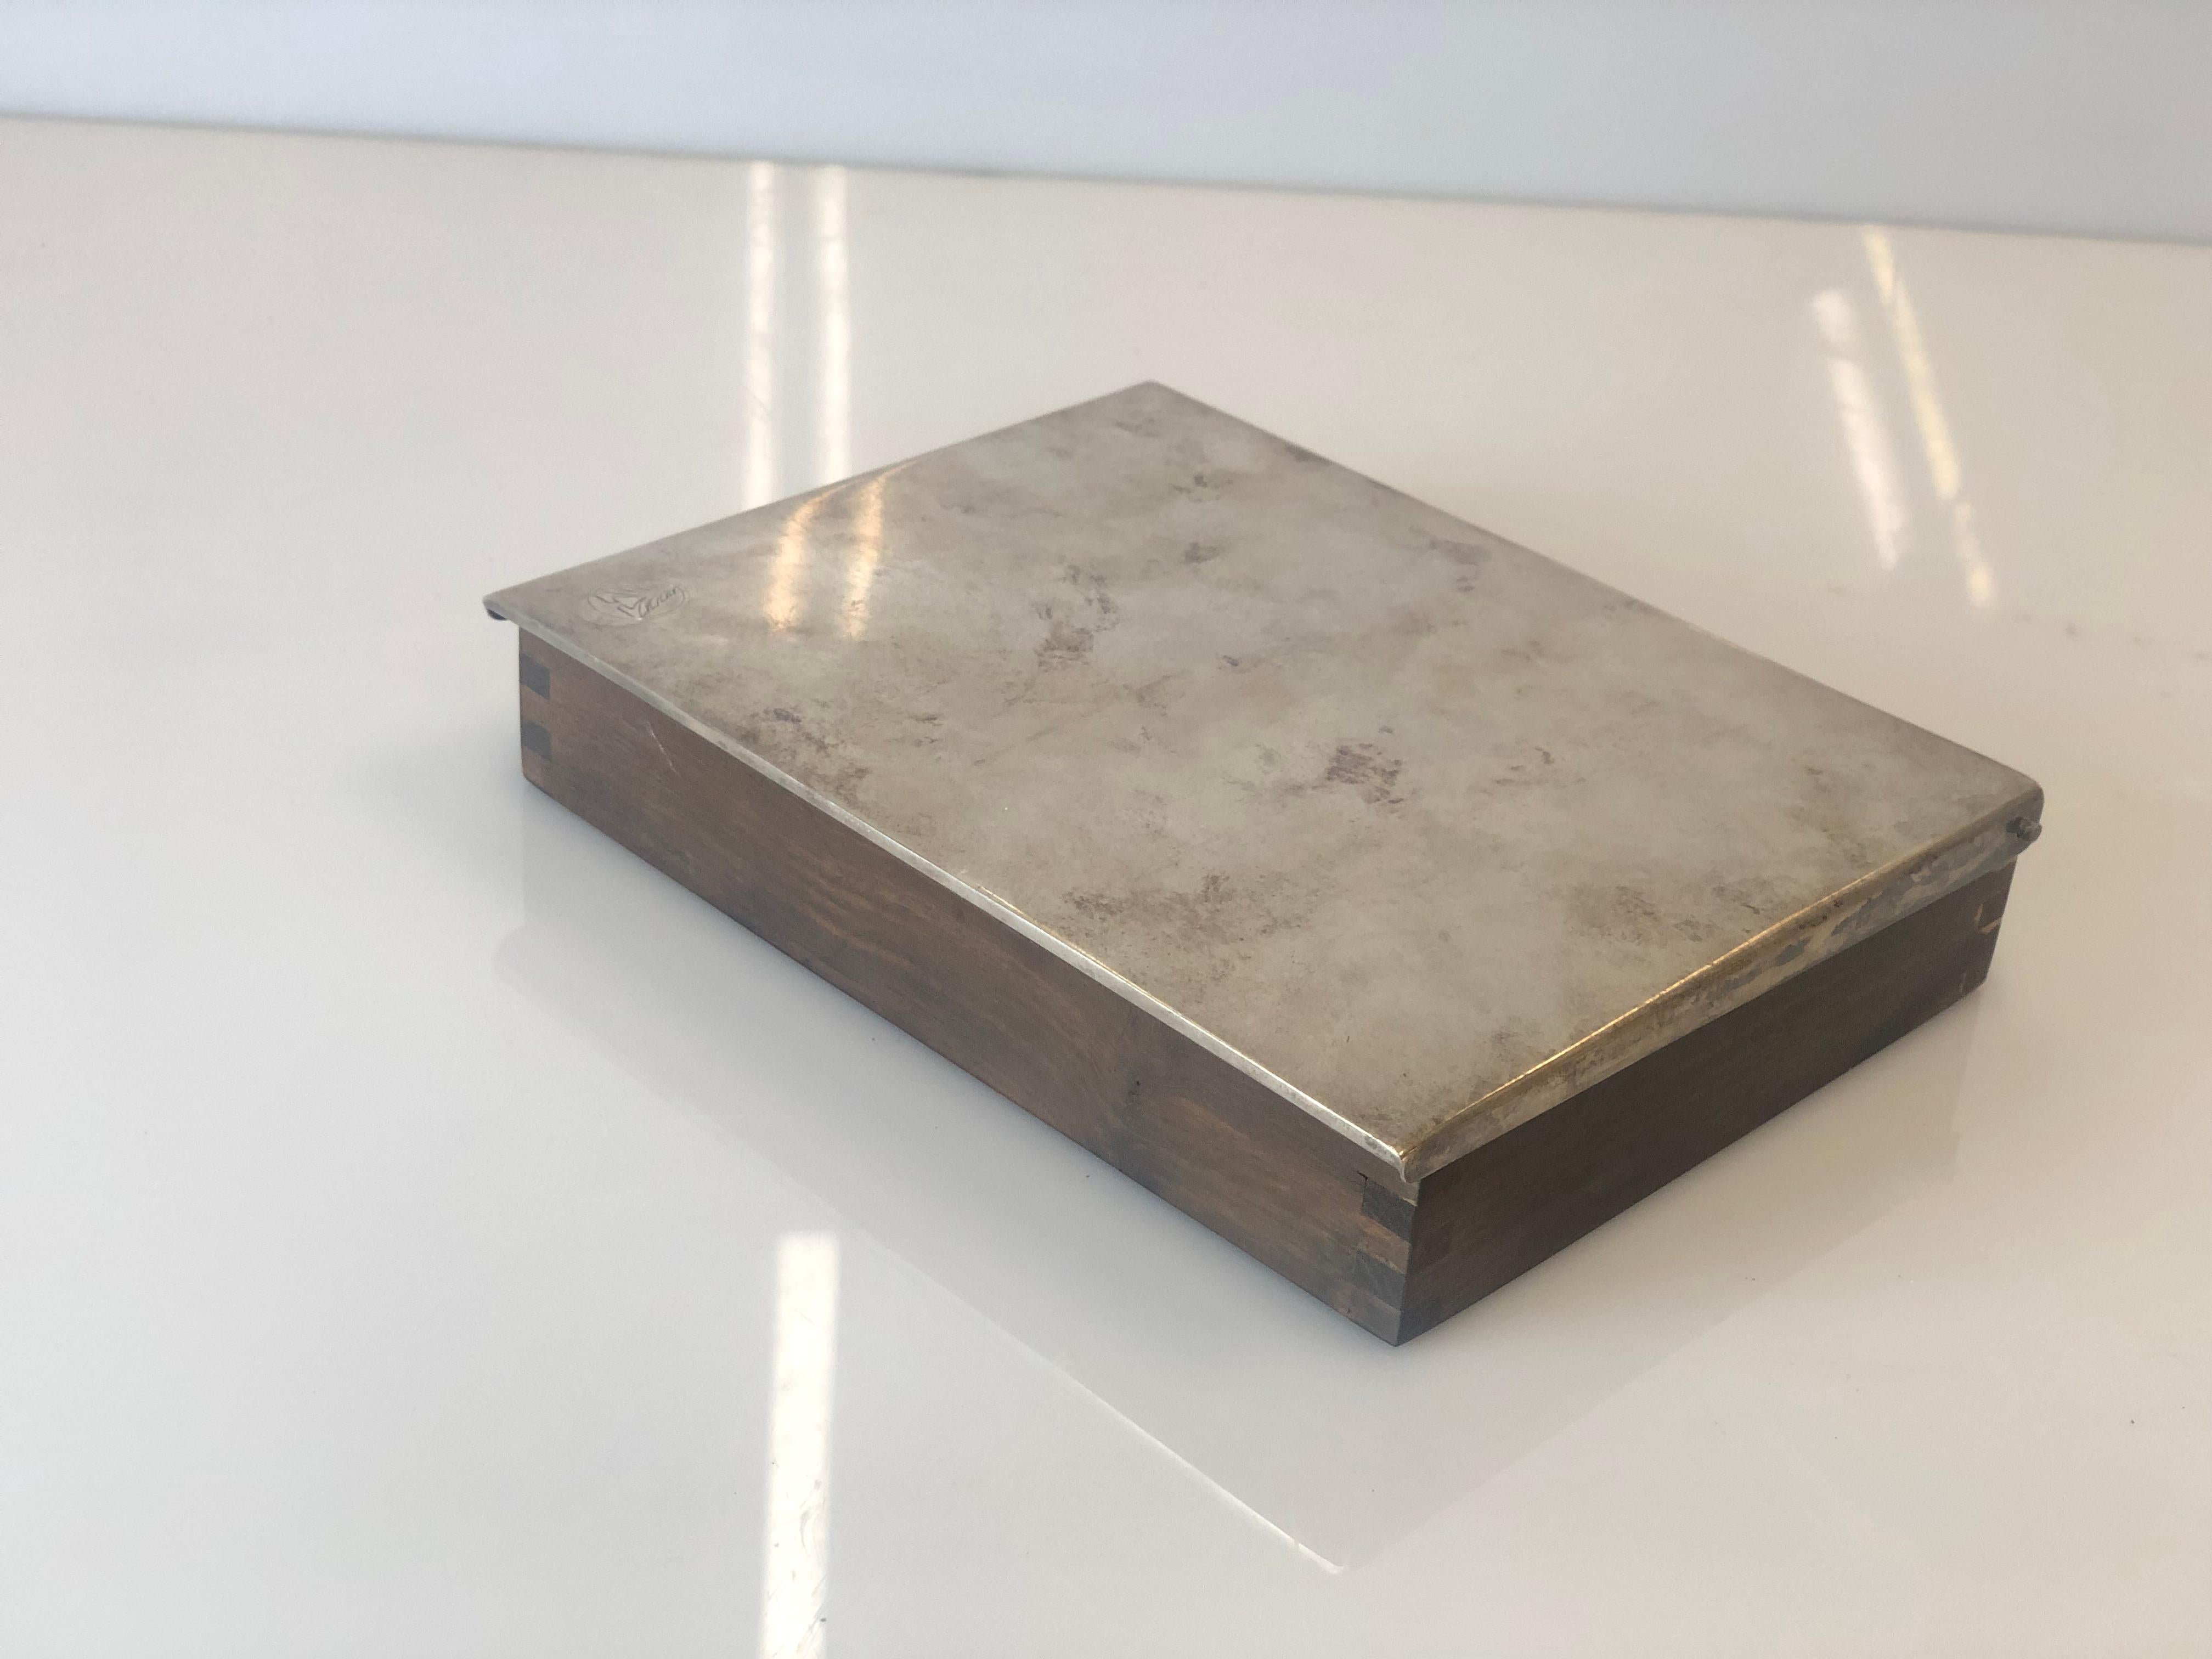 Very rare and unique cigar box in teak and silver. Designed by Tapio Wirkkala. Very sleak and elegant piece for someone who appreciates the 